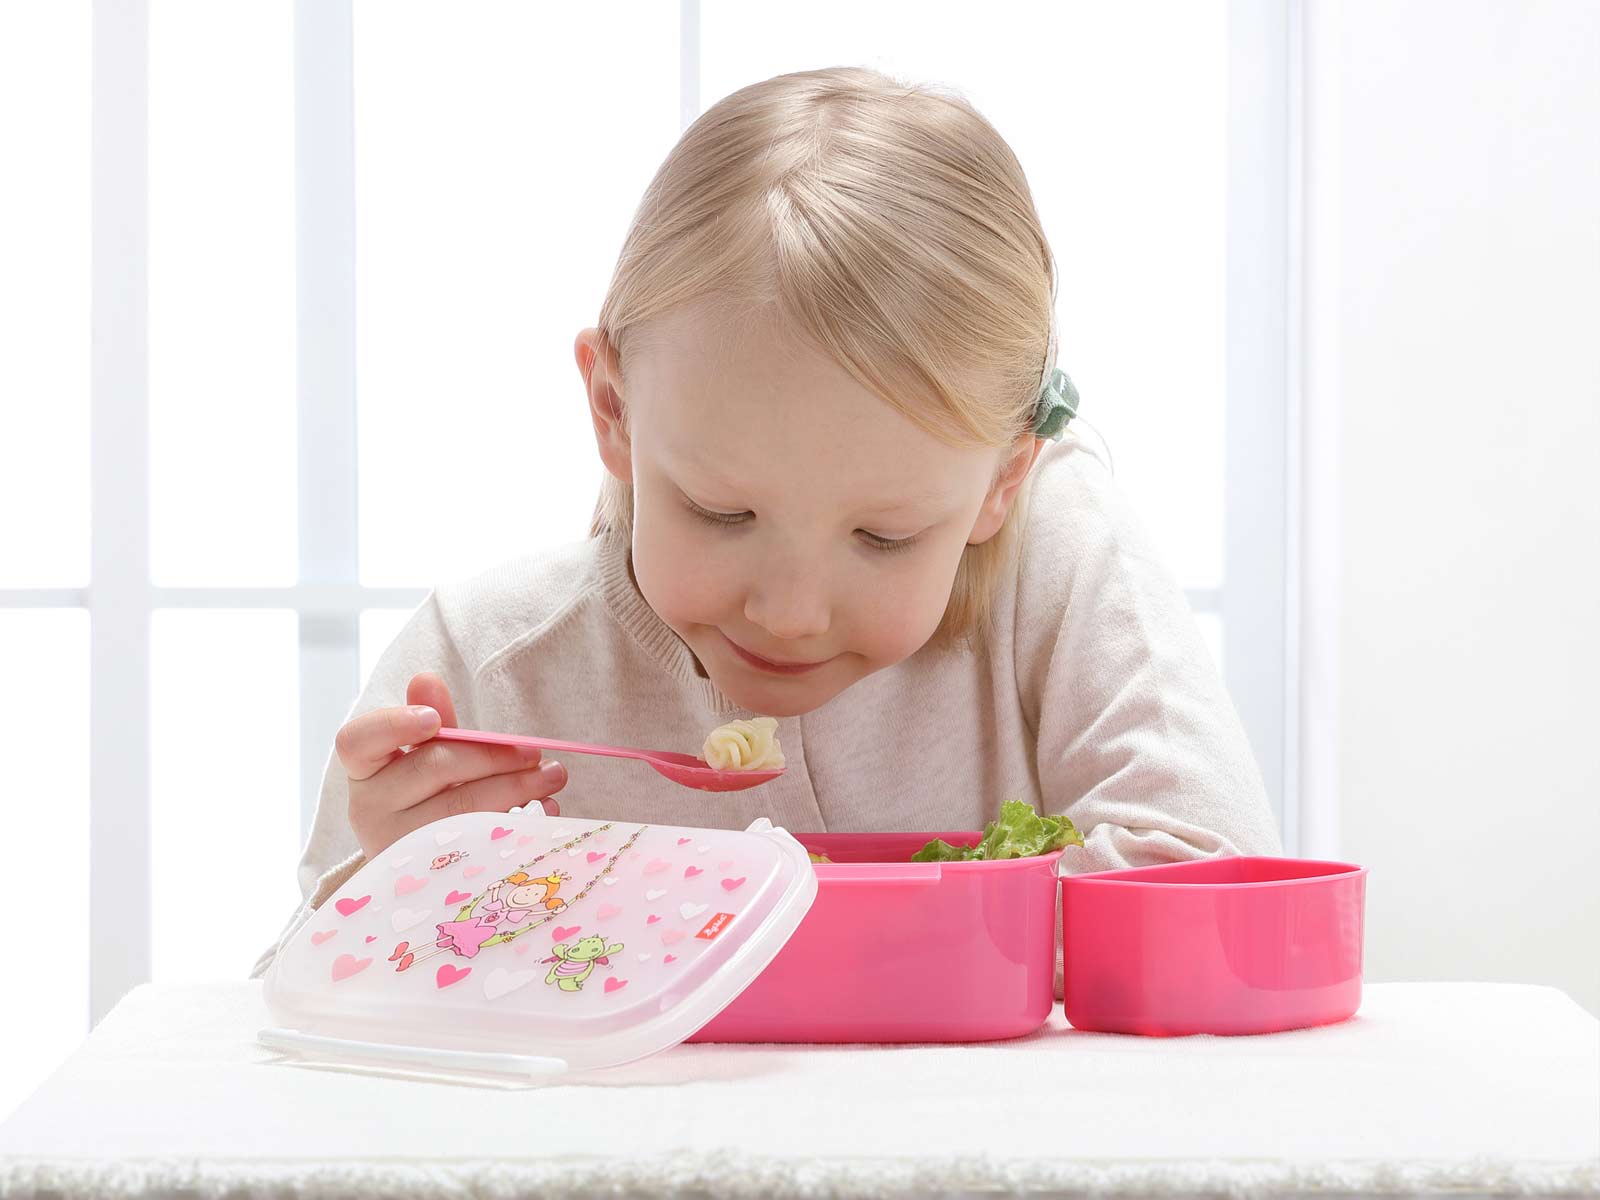 Sigikid Kinder Lunchset Pinky Queeny Prinzessin 2-teilig - A 